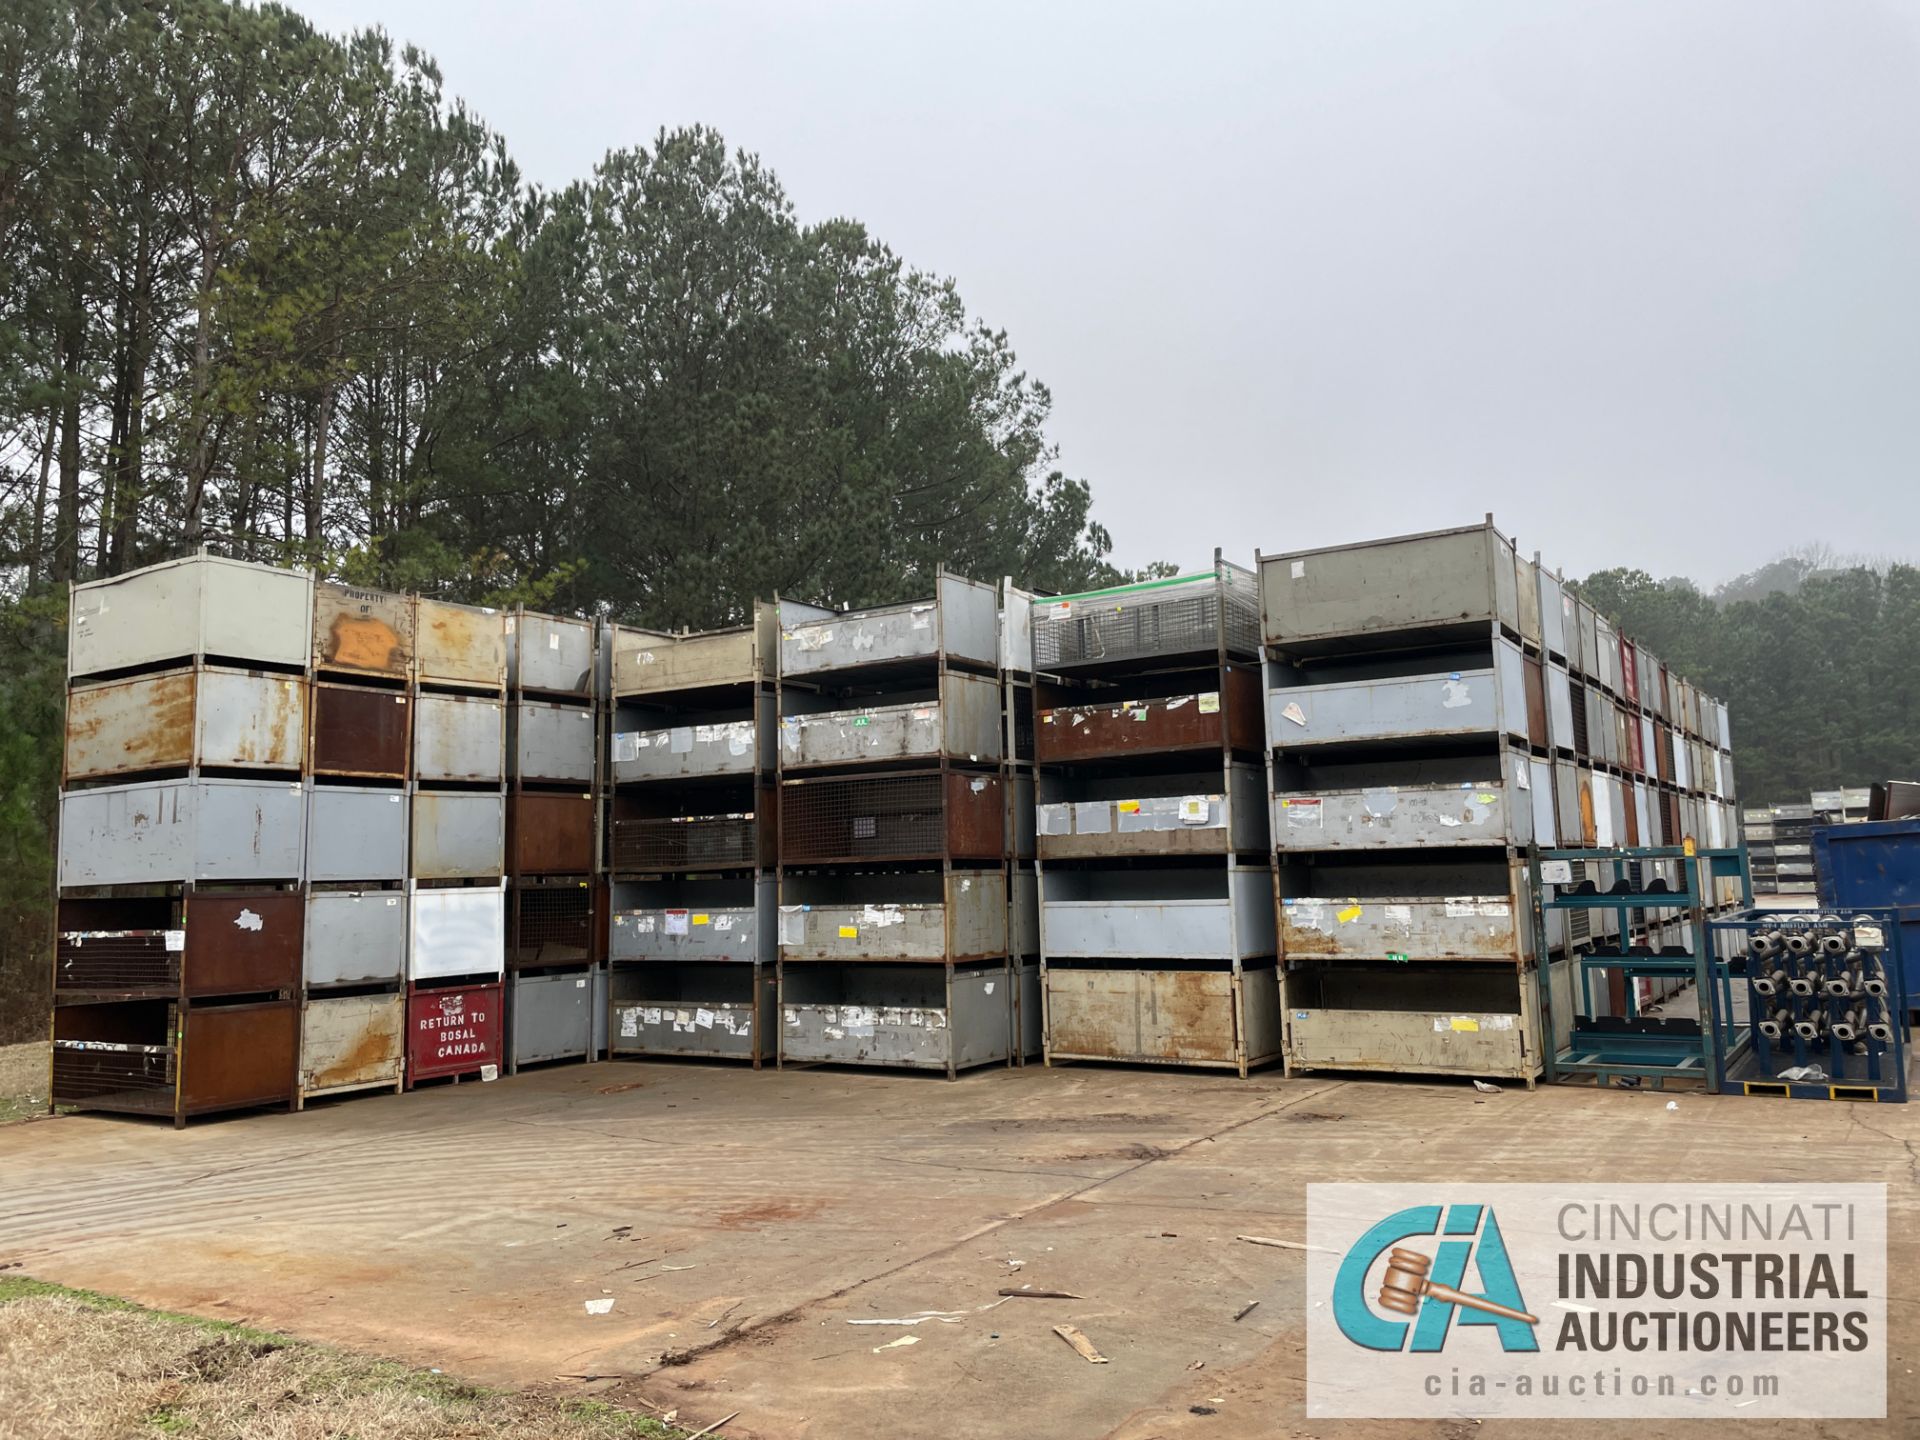 40" FRONT TO BACK X 80" LEFT TO RIGHT X 39" HIGH STACKABLE STEEL CONTAINERS - SEE LOT NO. 584A FOR - Image 3 of 5